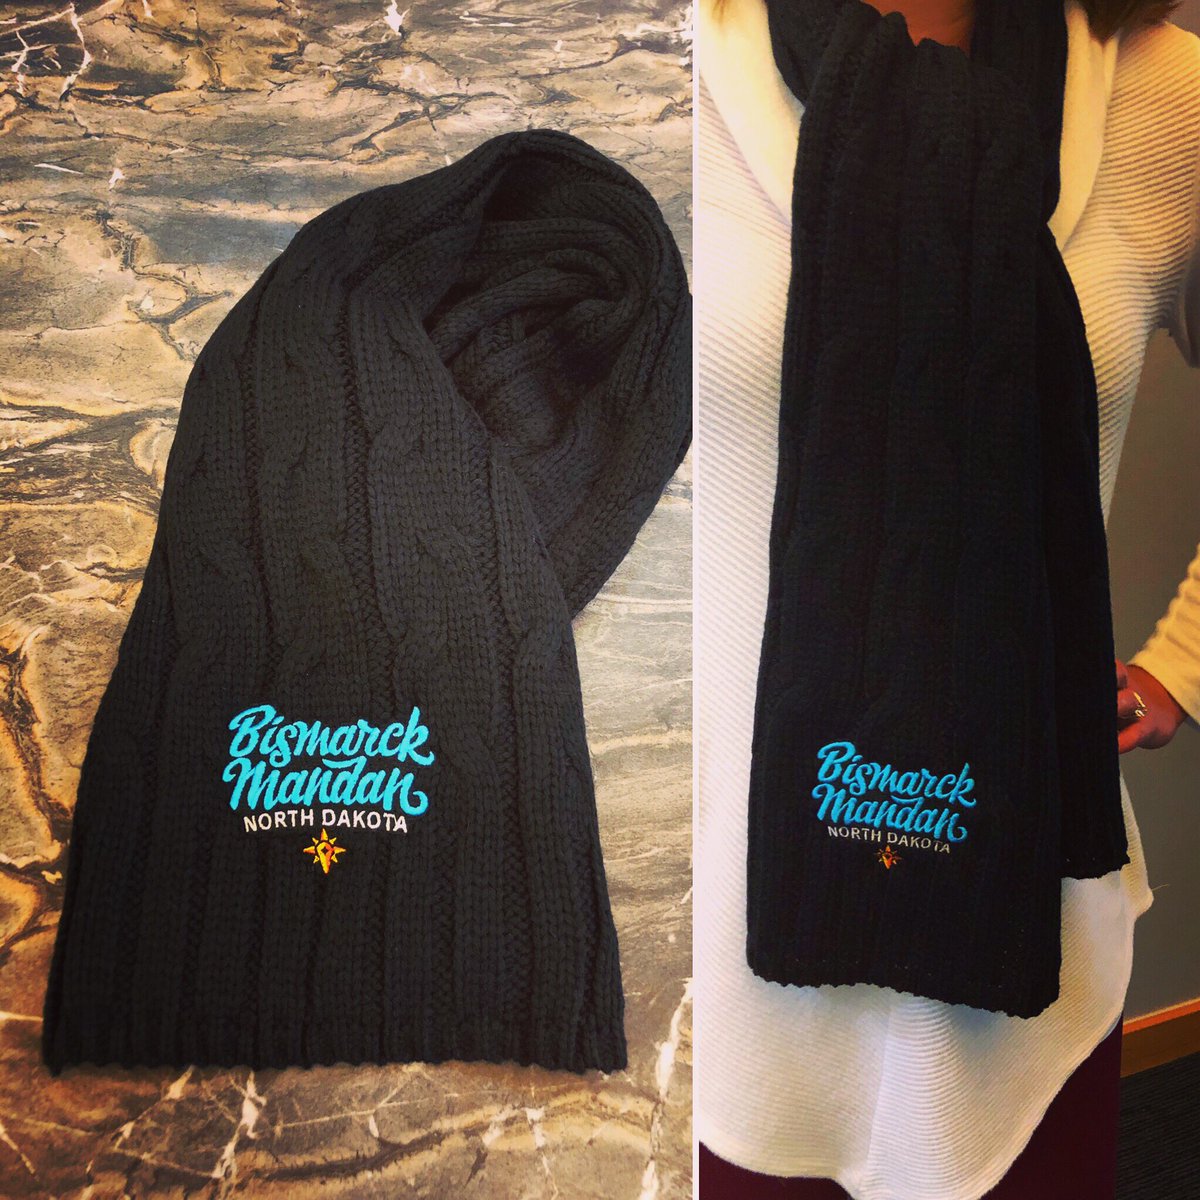 New scarves have arrived in the Genuine Dakota Gift Shop! Sure to keep you warm AND trendy, they’re selling for $17.50 each, but mention this post and receive 20% off now through October 18! 1600 Burnt Boat Drive in Bismarck, M-F from 7:30 am-5 pm. #ilovebisman #noboundariesnd